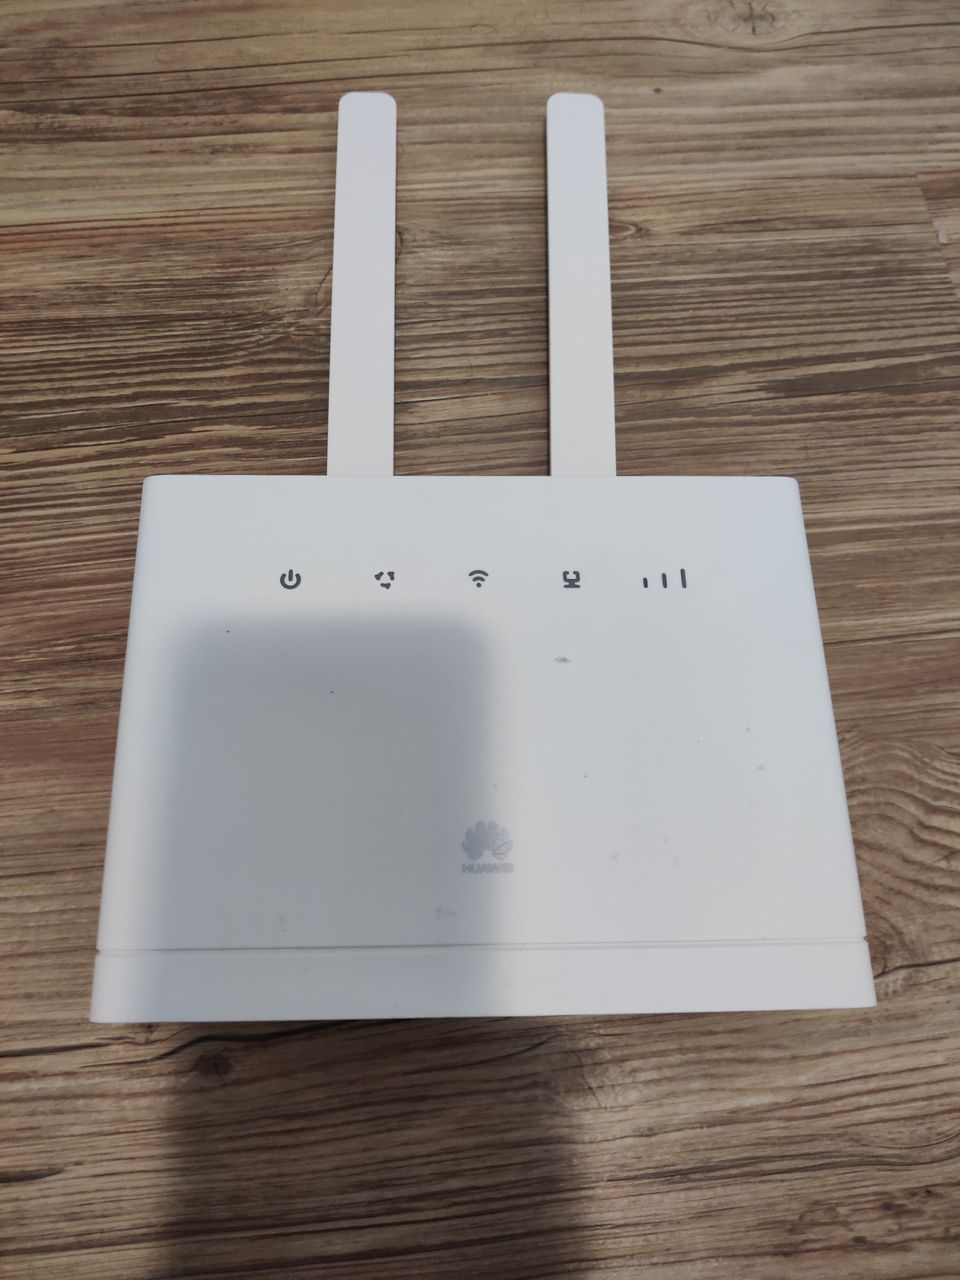 Router that requires sim card